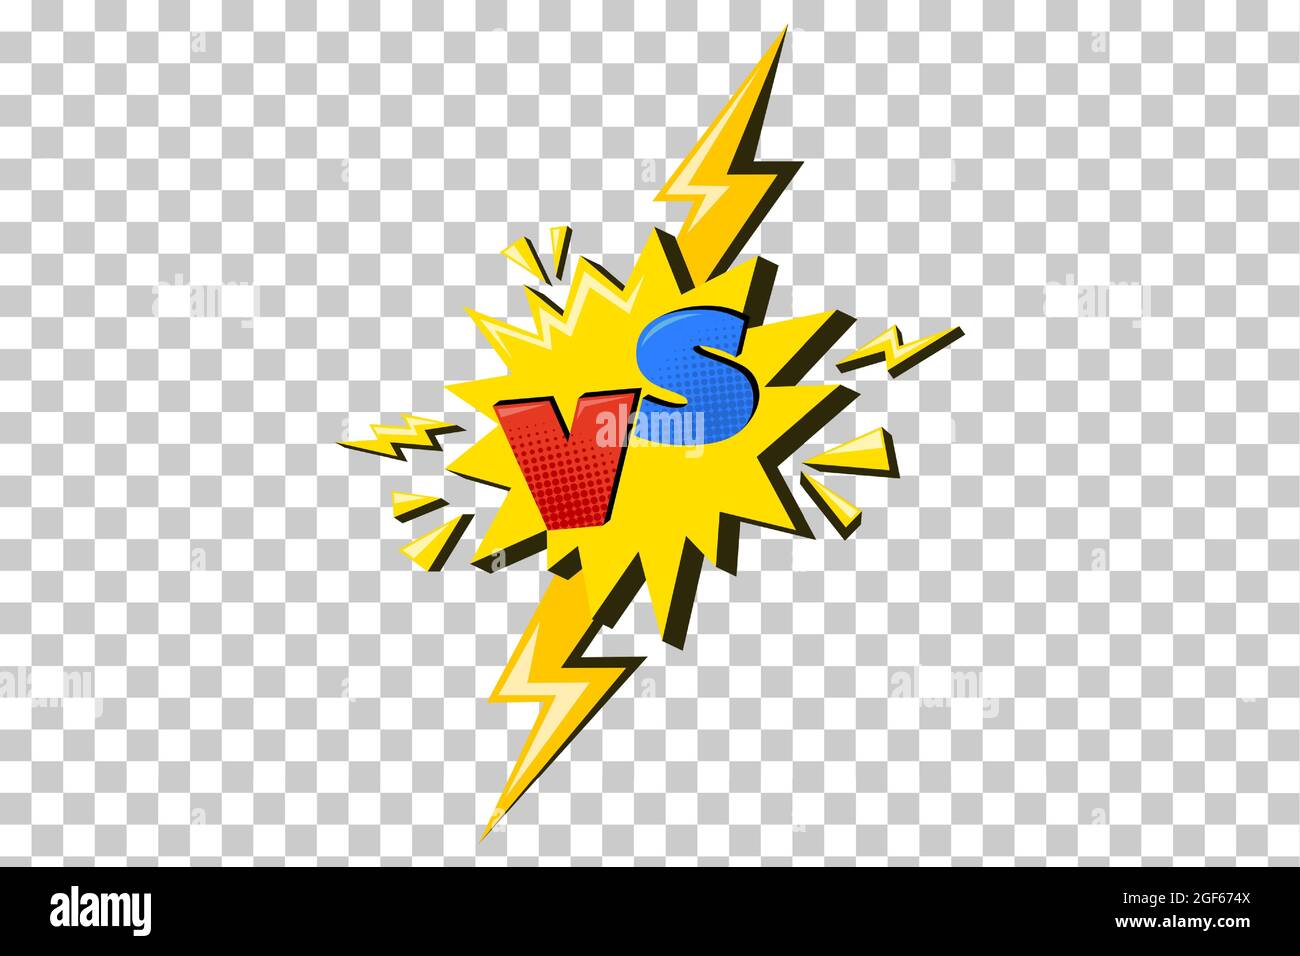 Versus comic design with lightning. Yellow flash with halftone vs symbol. Vector illustration isolated in transparent background Stock Vector